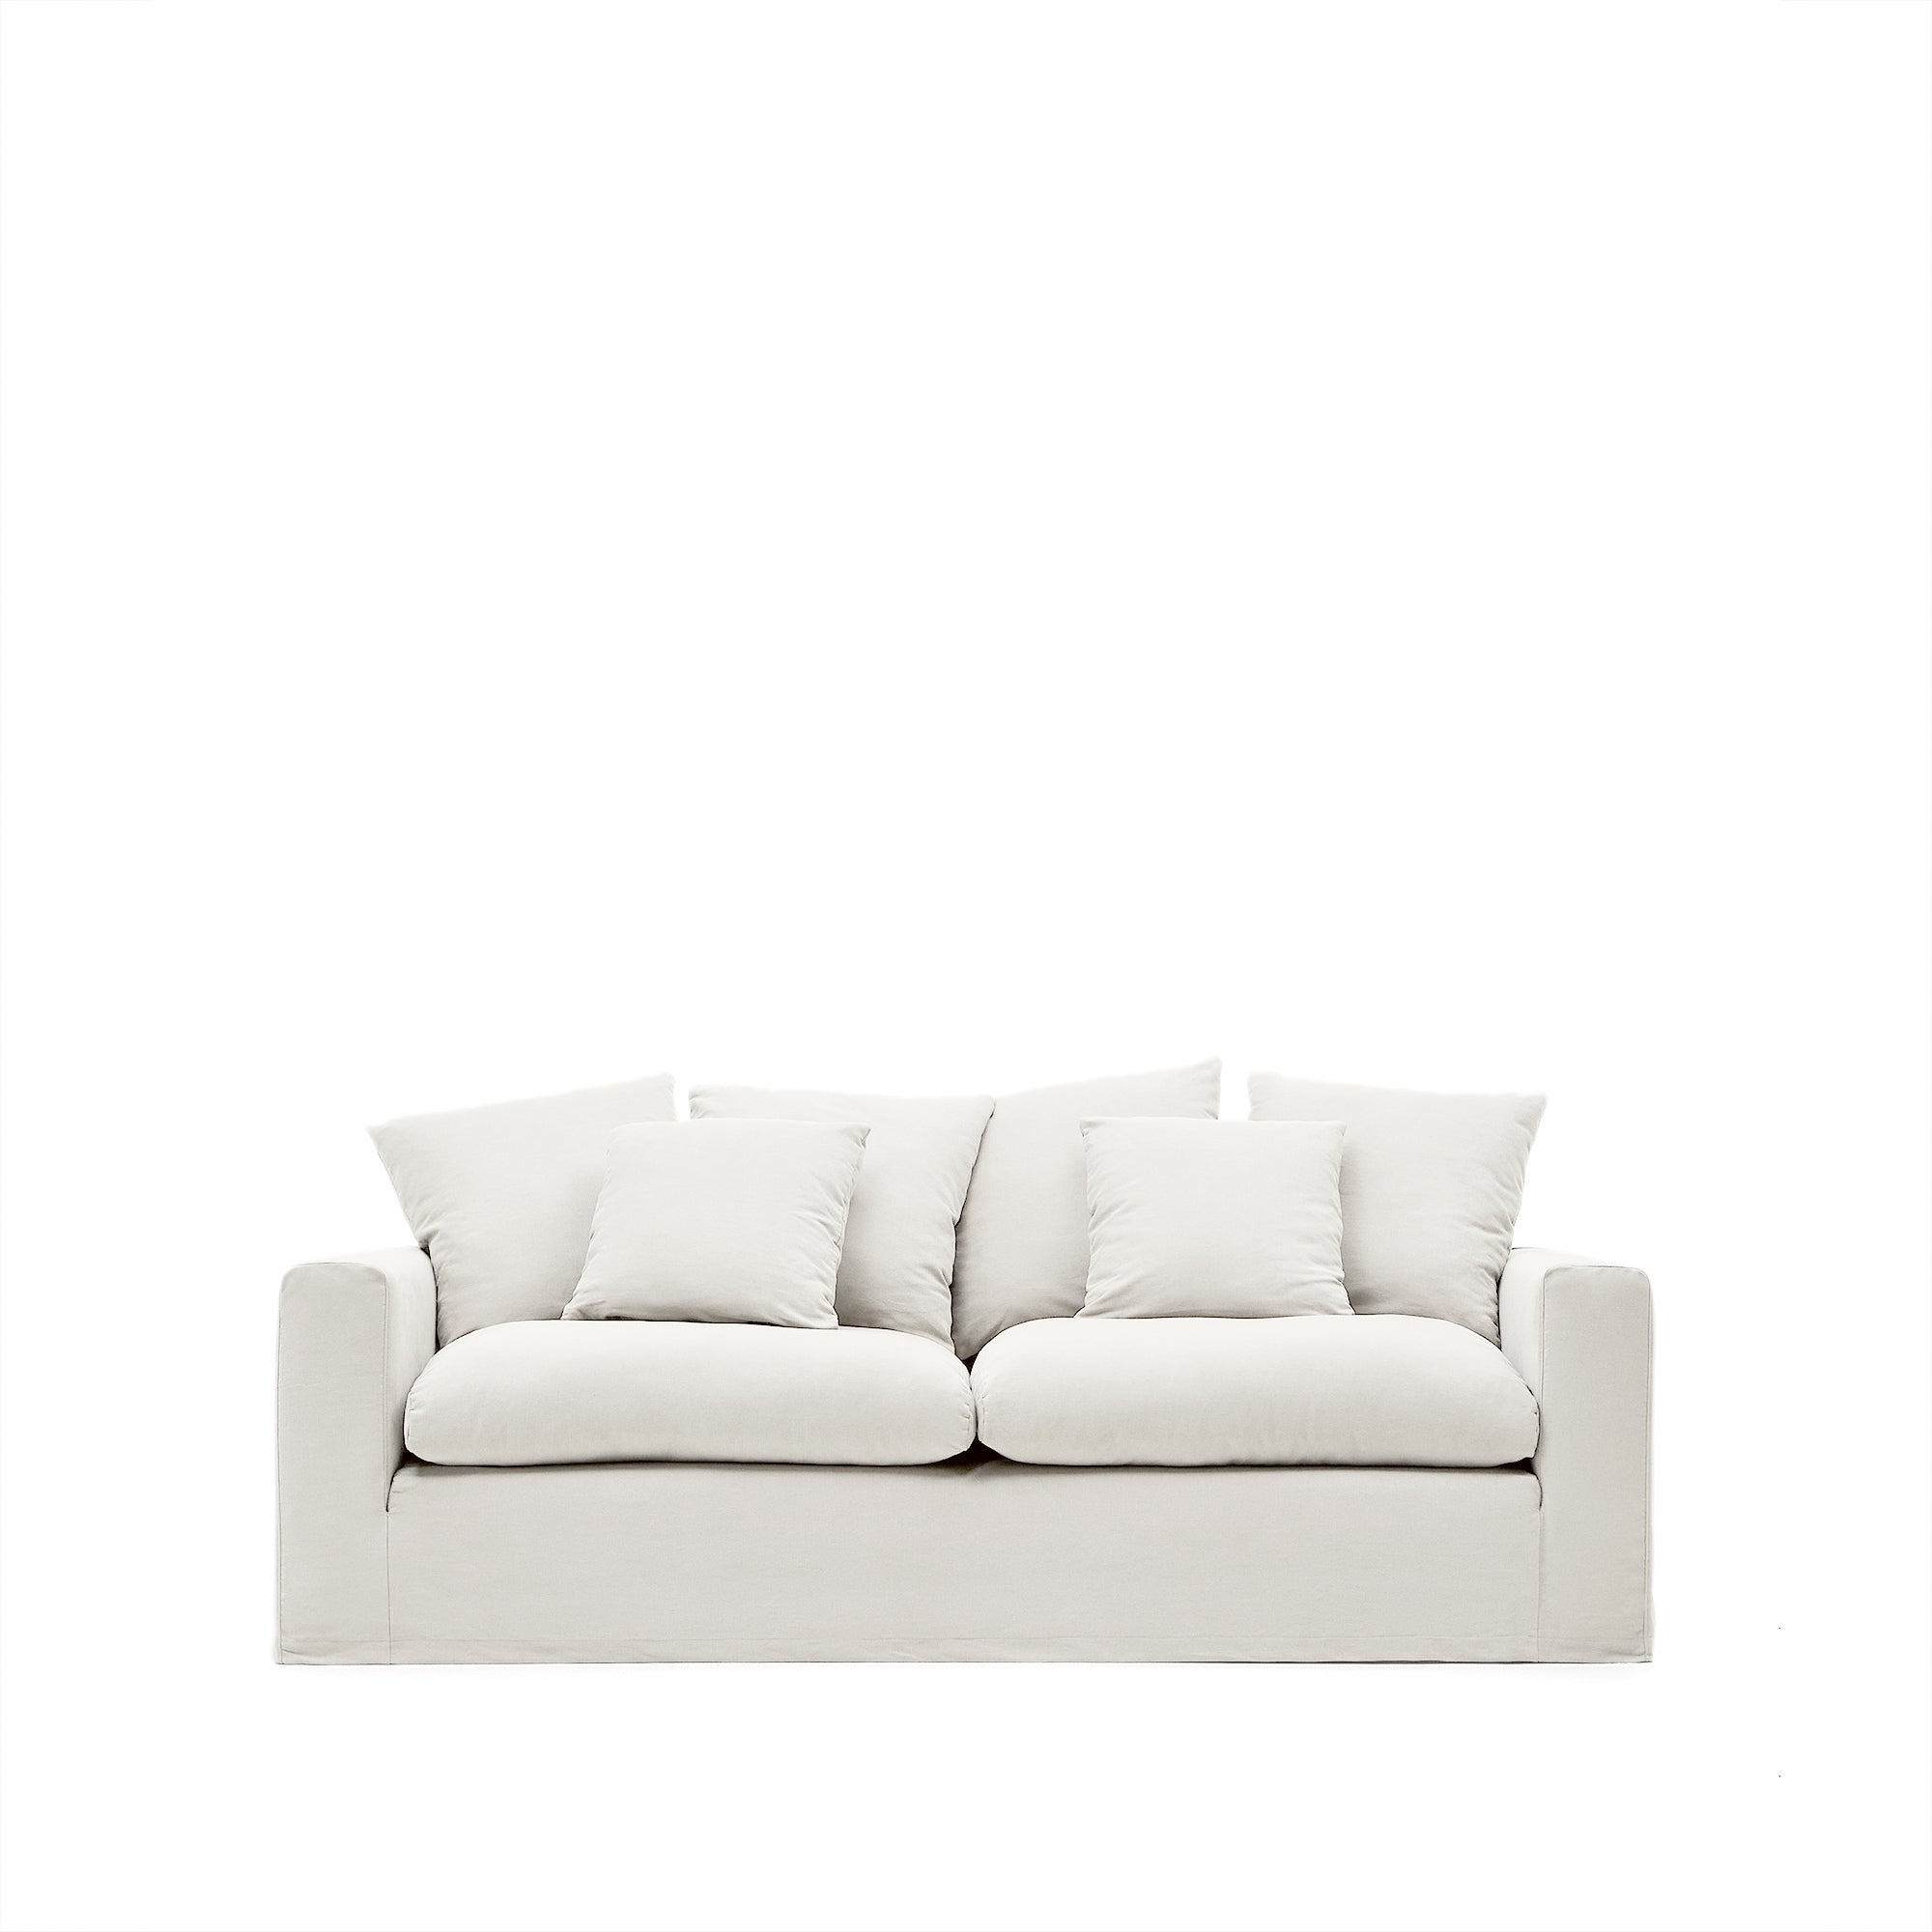 Nora three-seater sofa with removable cover and ecru linen and cotton cushions, 240 cm